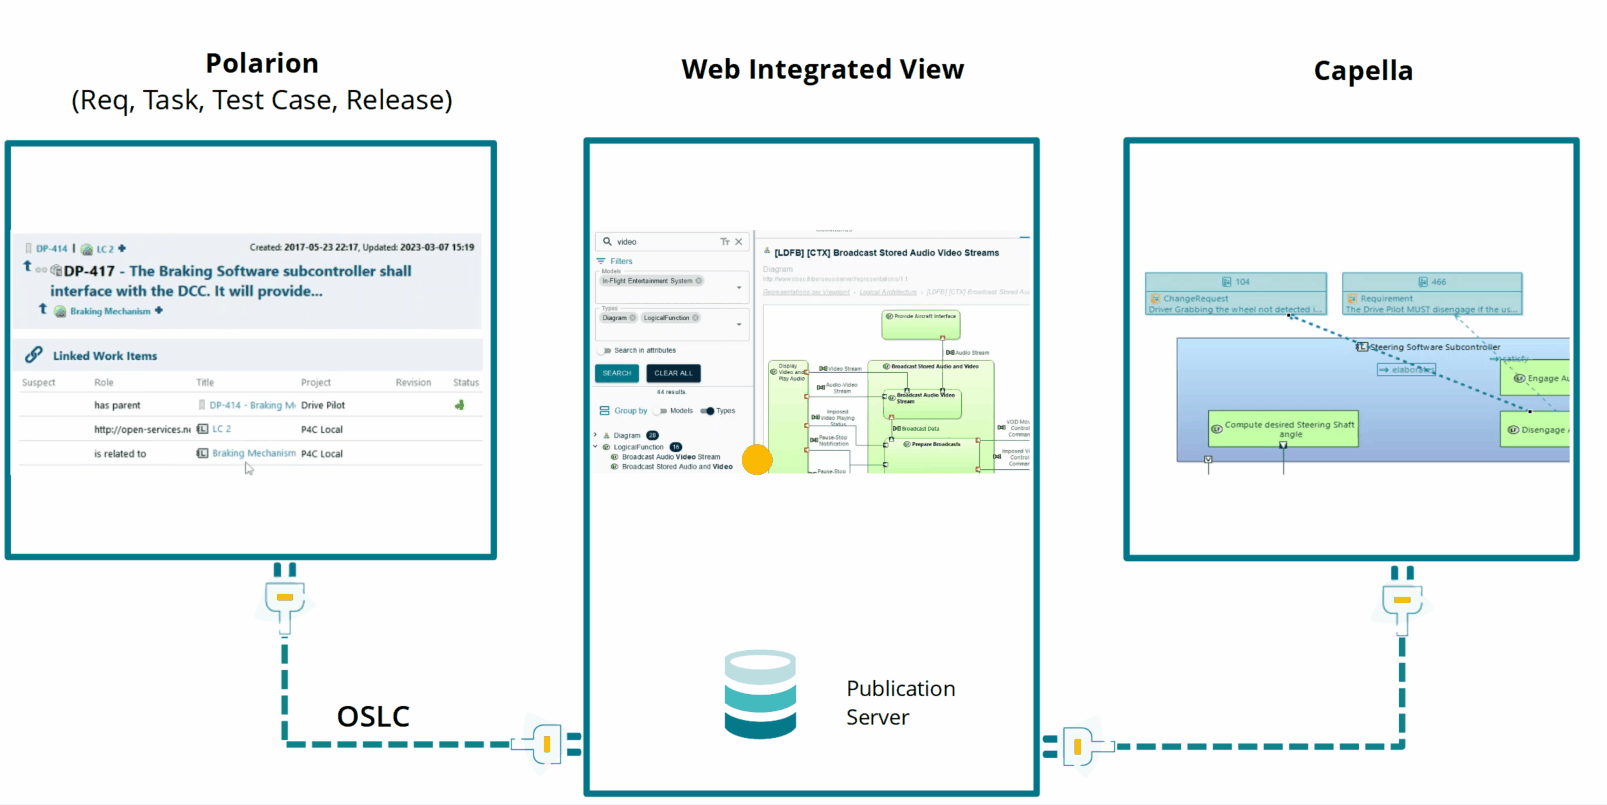 Traceability link creation inside Web integrated view